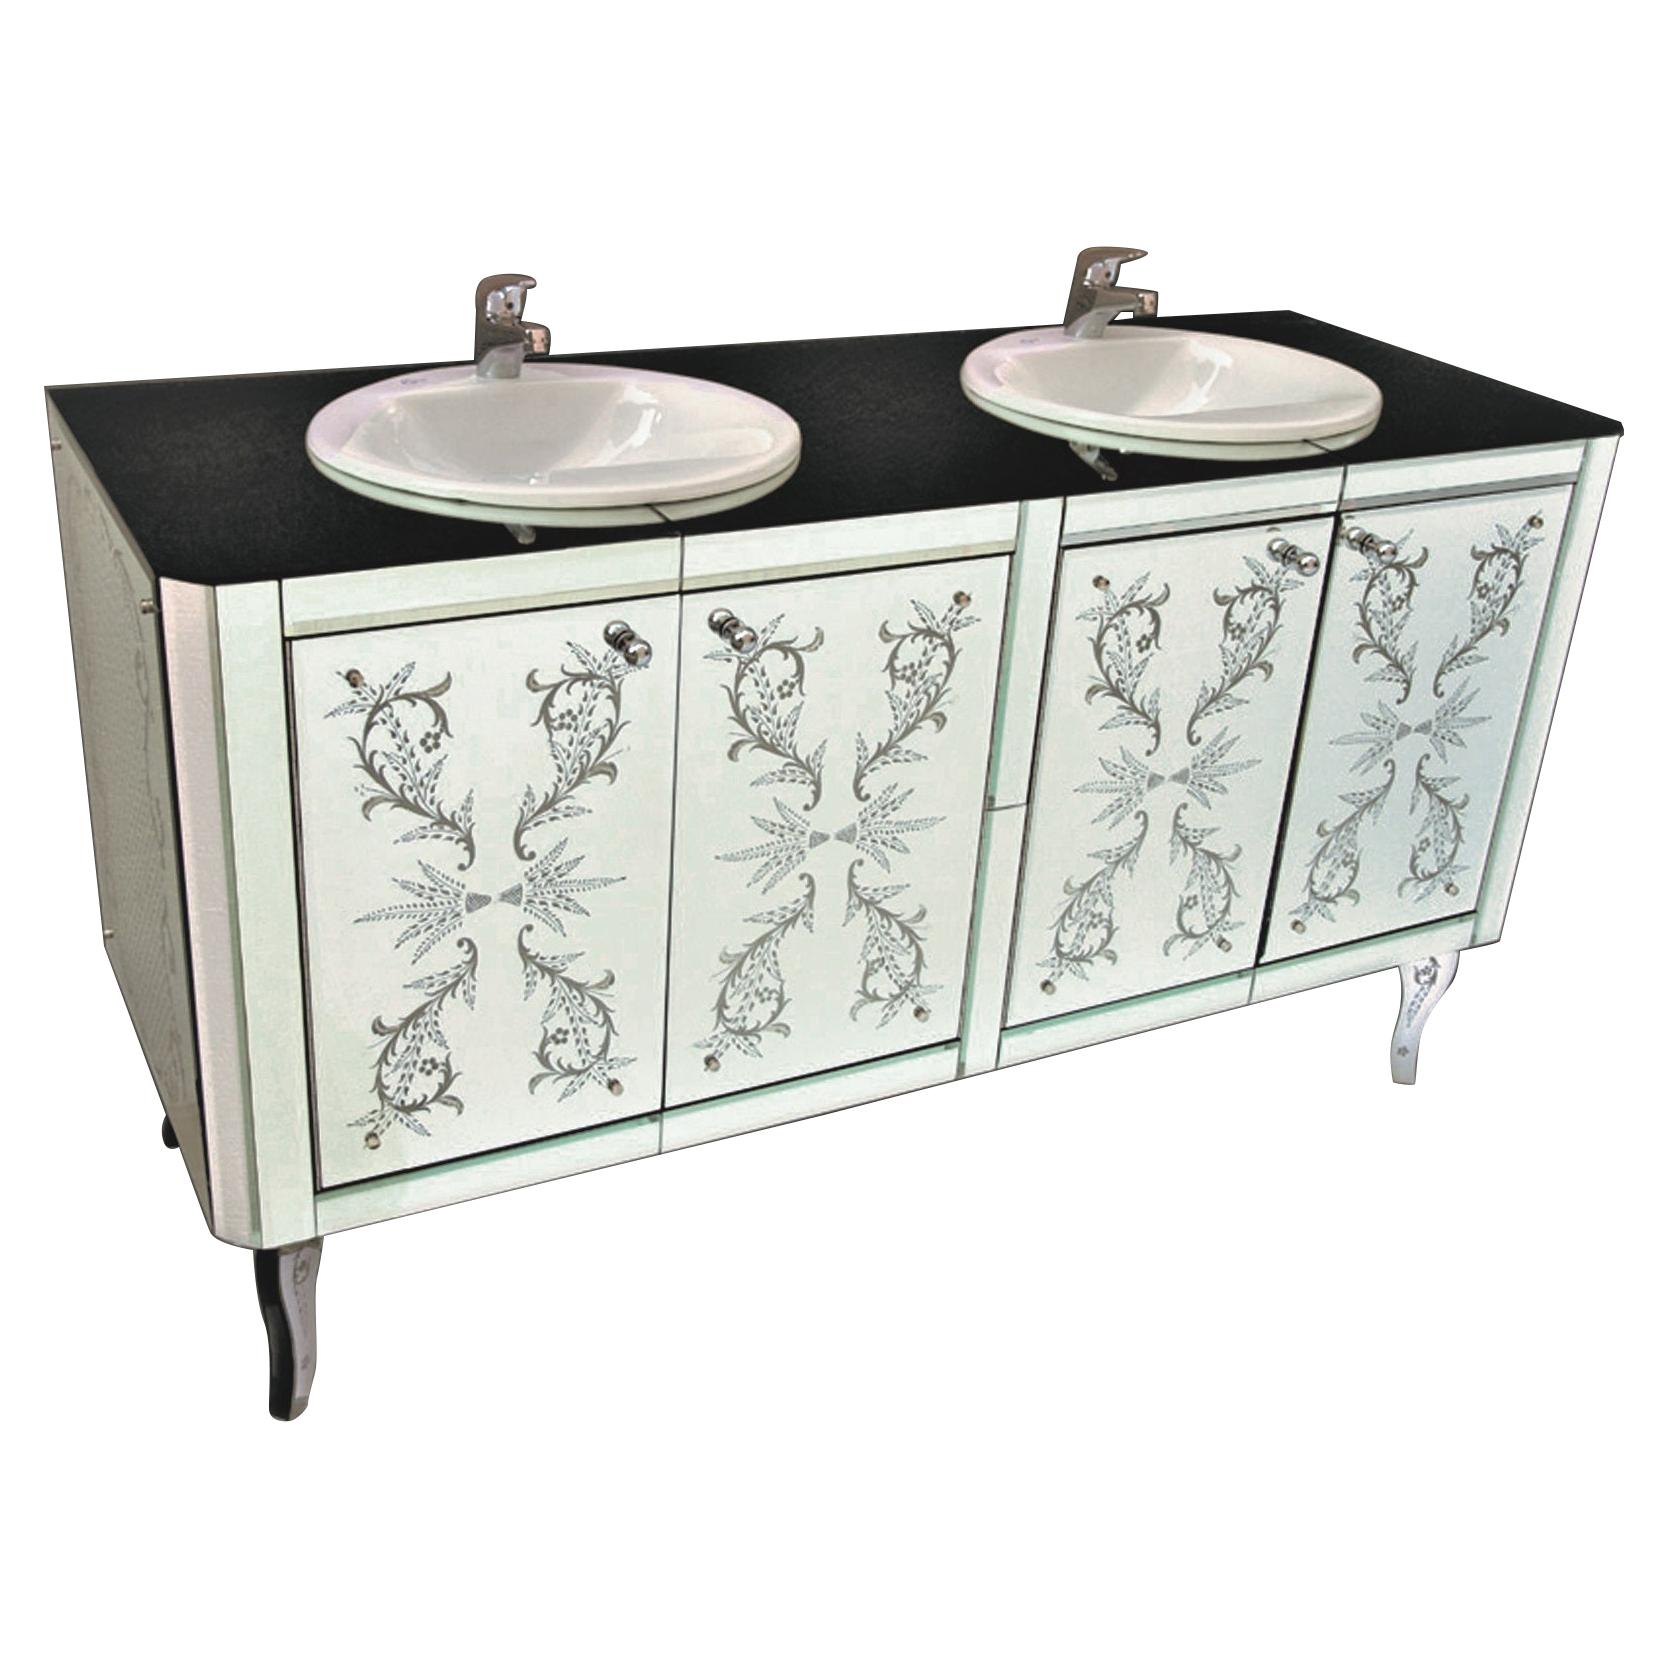 "CA' PESARO" Murano Glass Wash Cabinet by Fratelli Tosi Hand Crafted